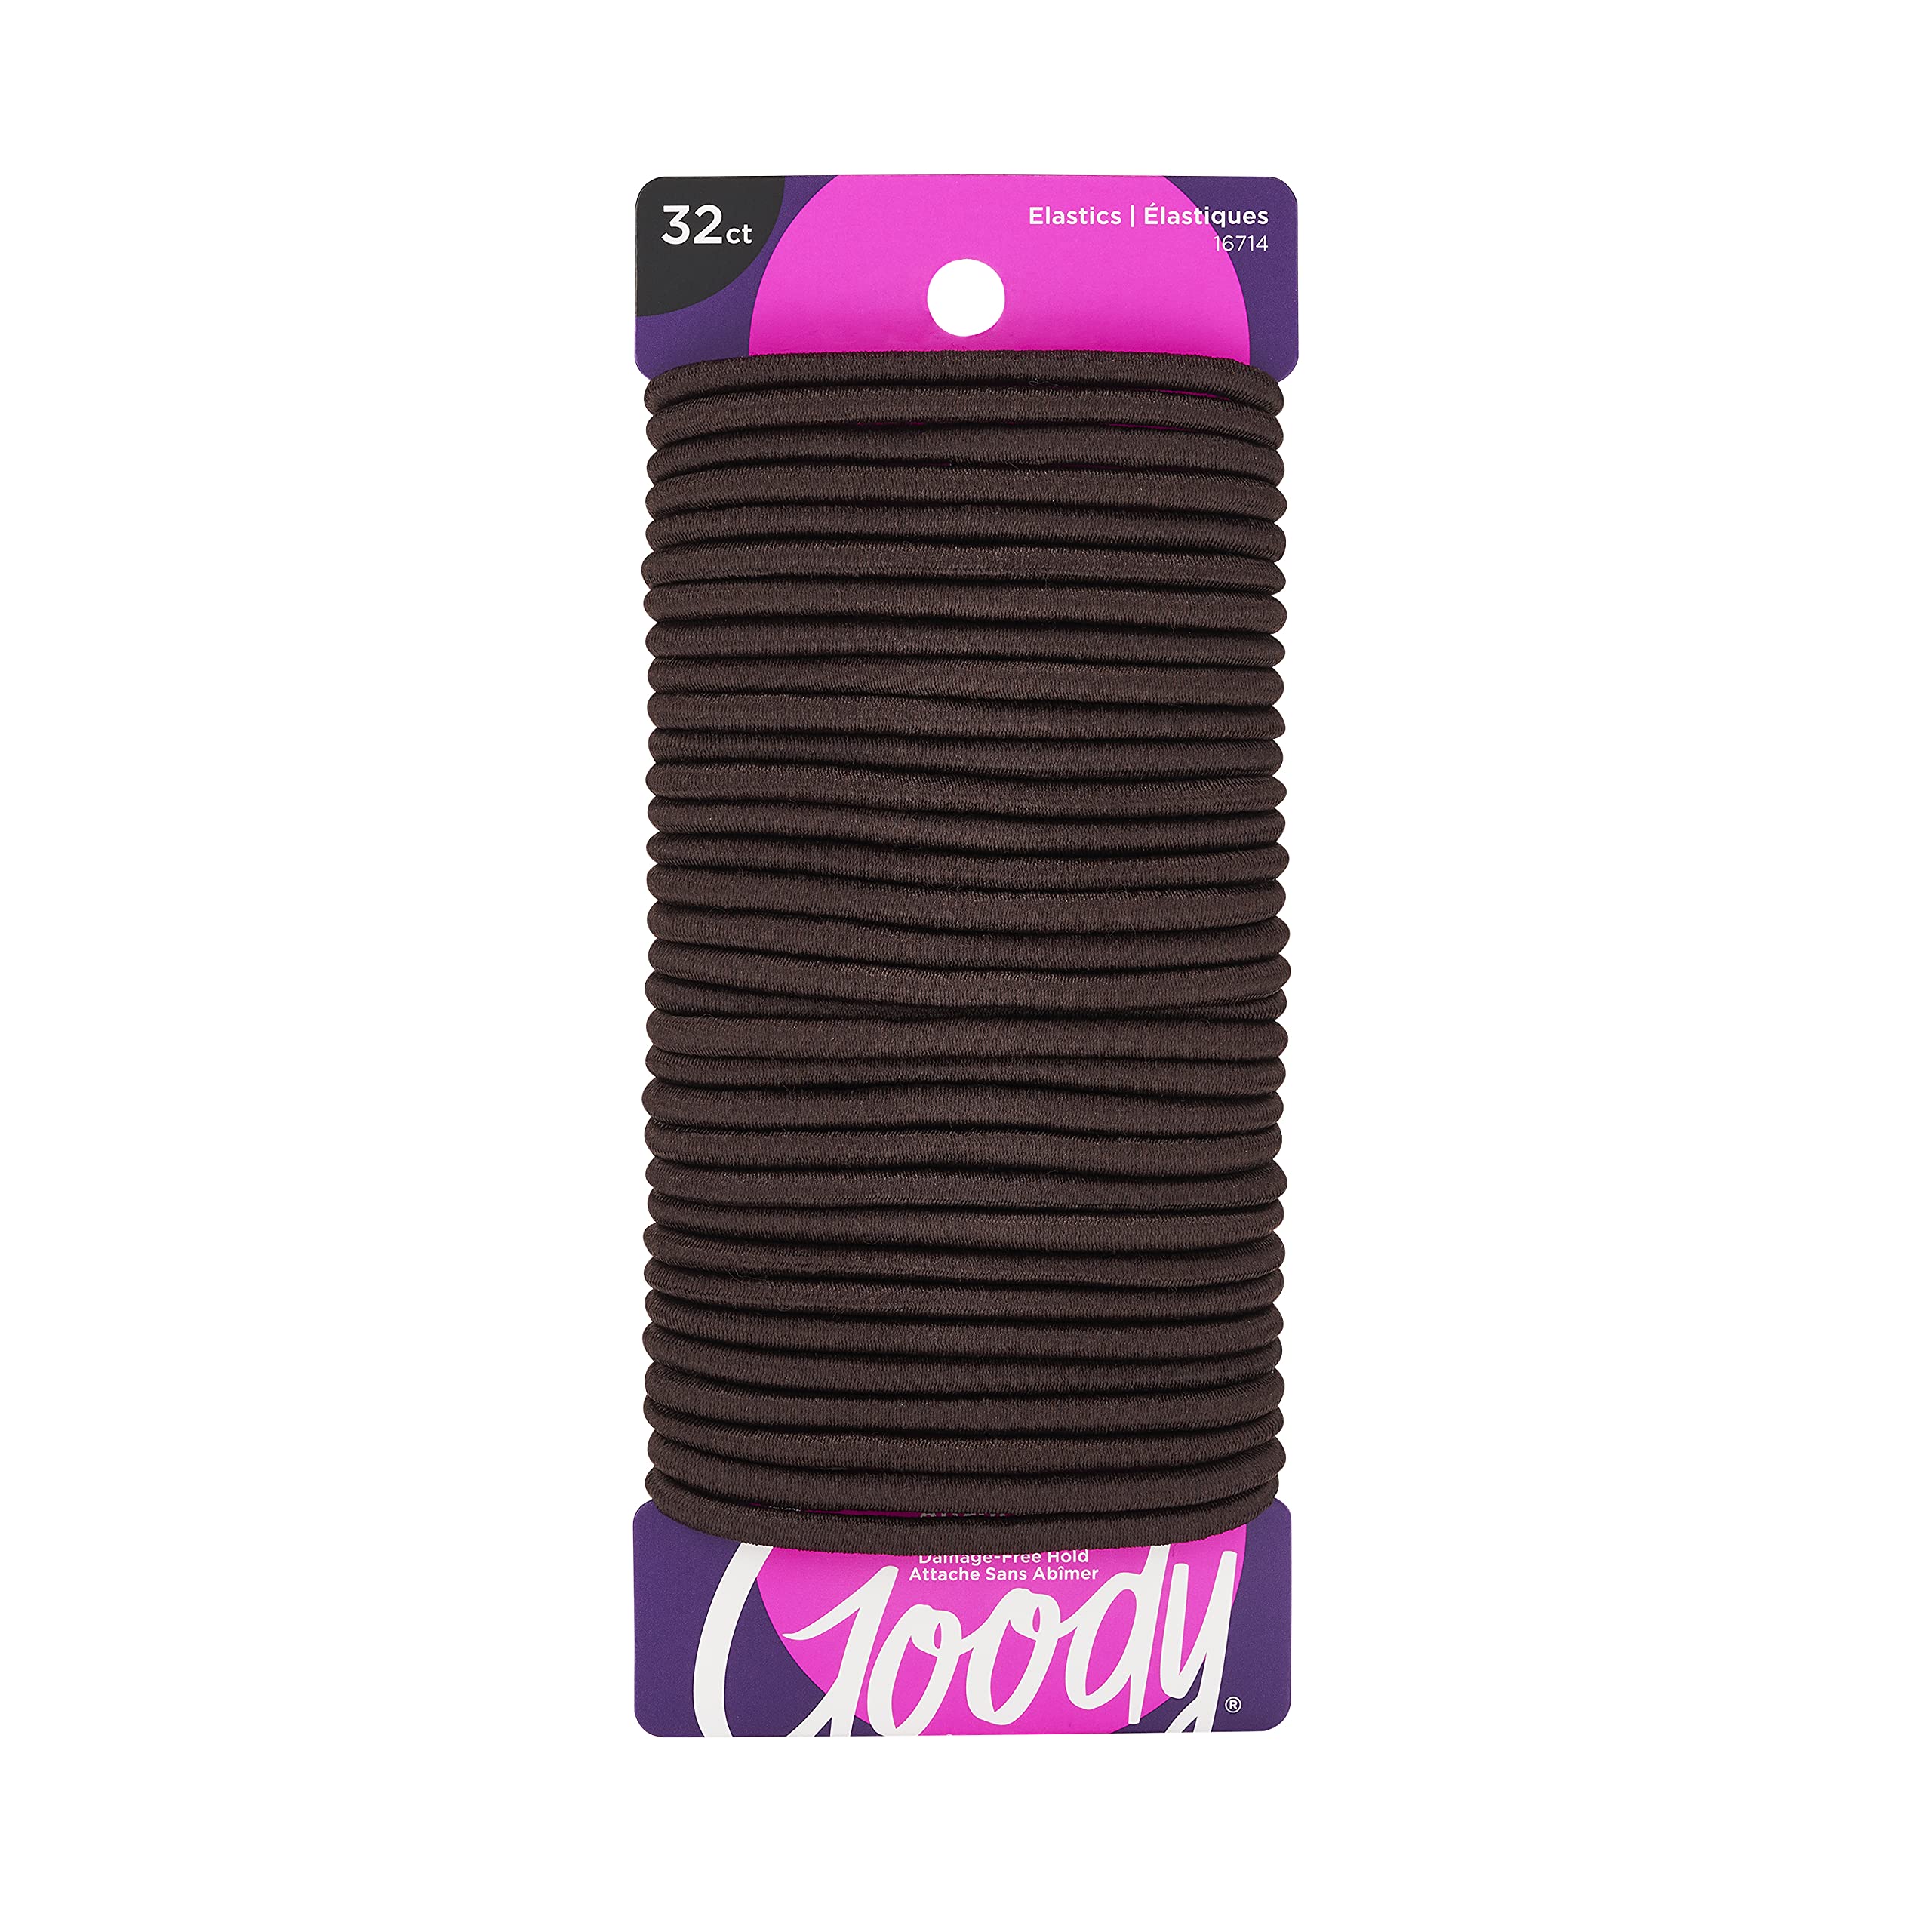 Goody Ouchless Goody Hair Ouchless Women's Hair Braided Elastics 4mm for Medium Hair, Brown, 32 Count (Pack of 1)